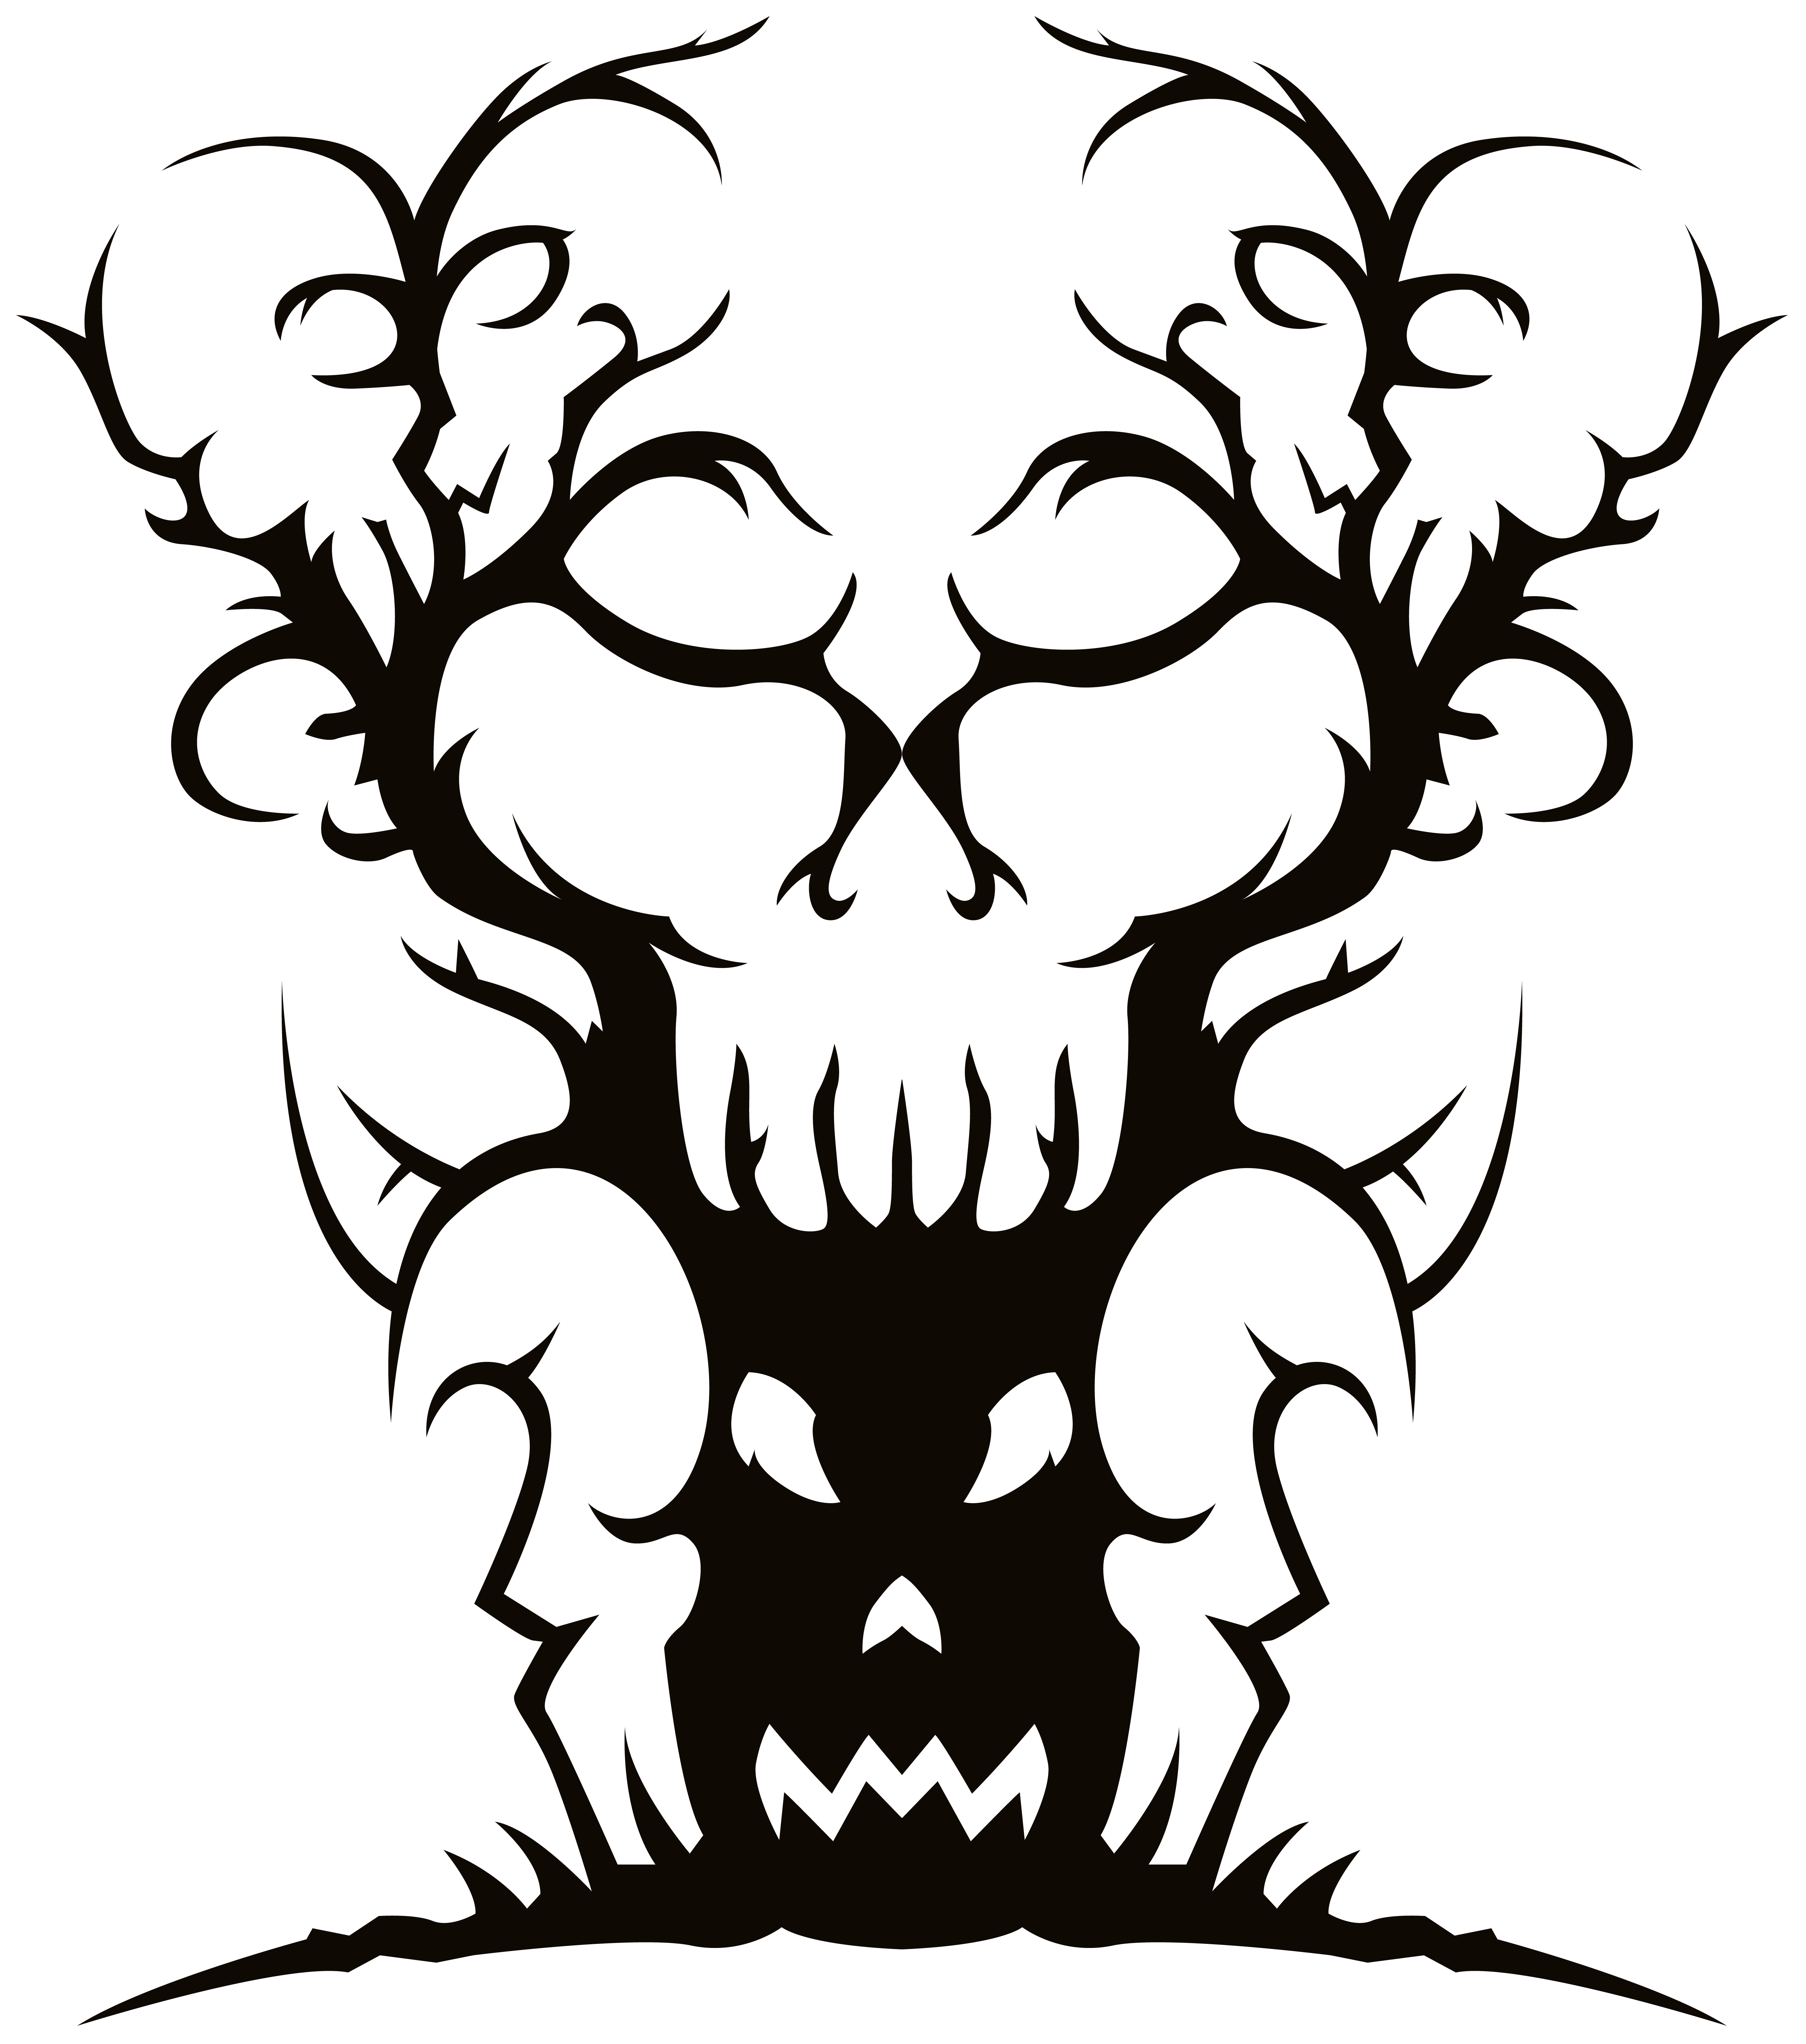 Clipart halloween creepy. Scary spooky tree png